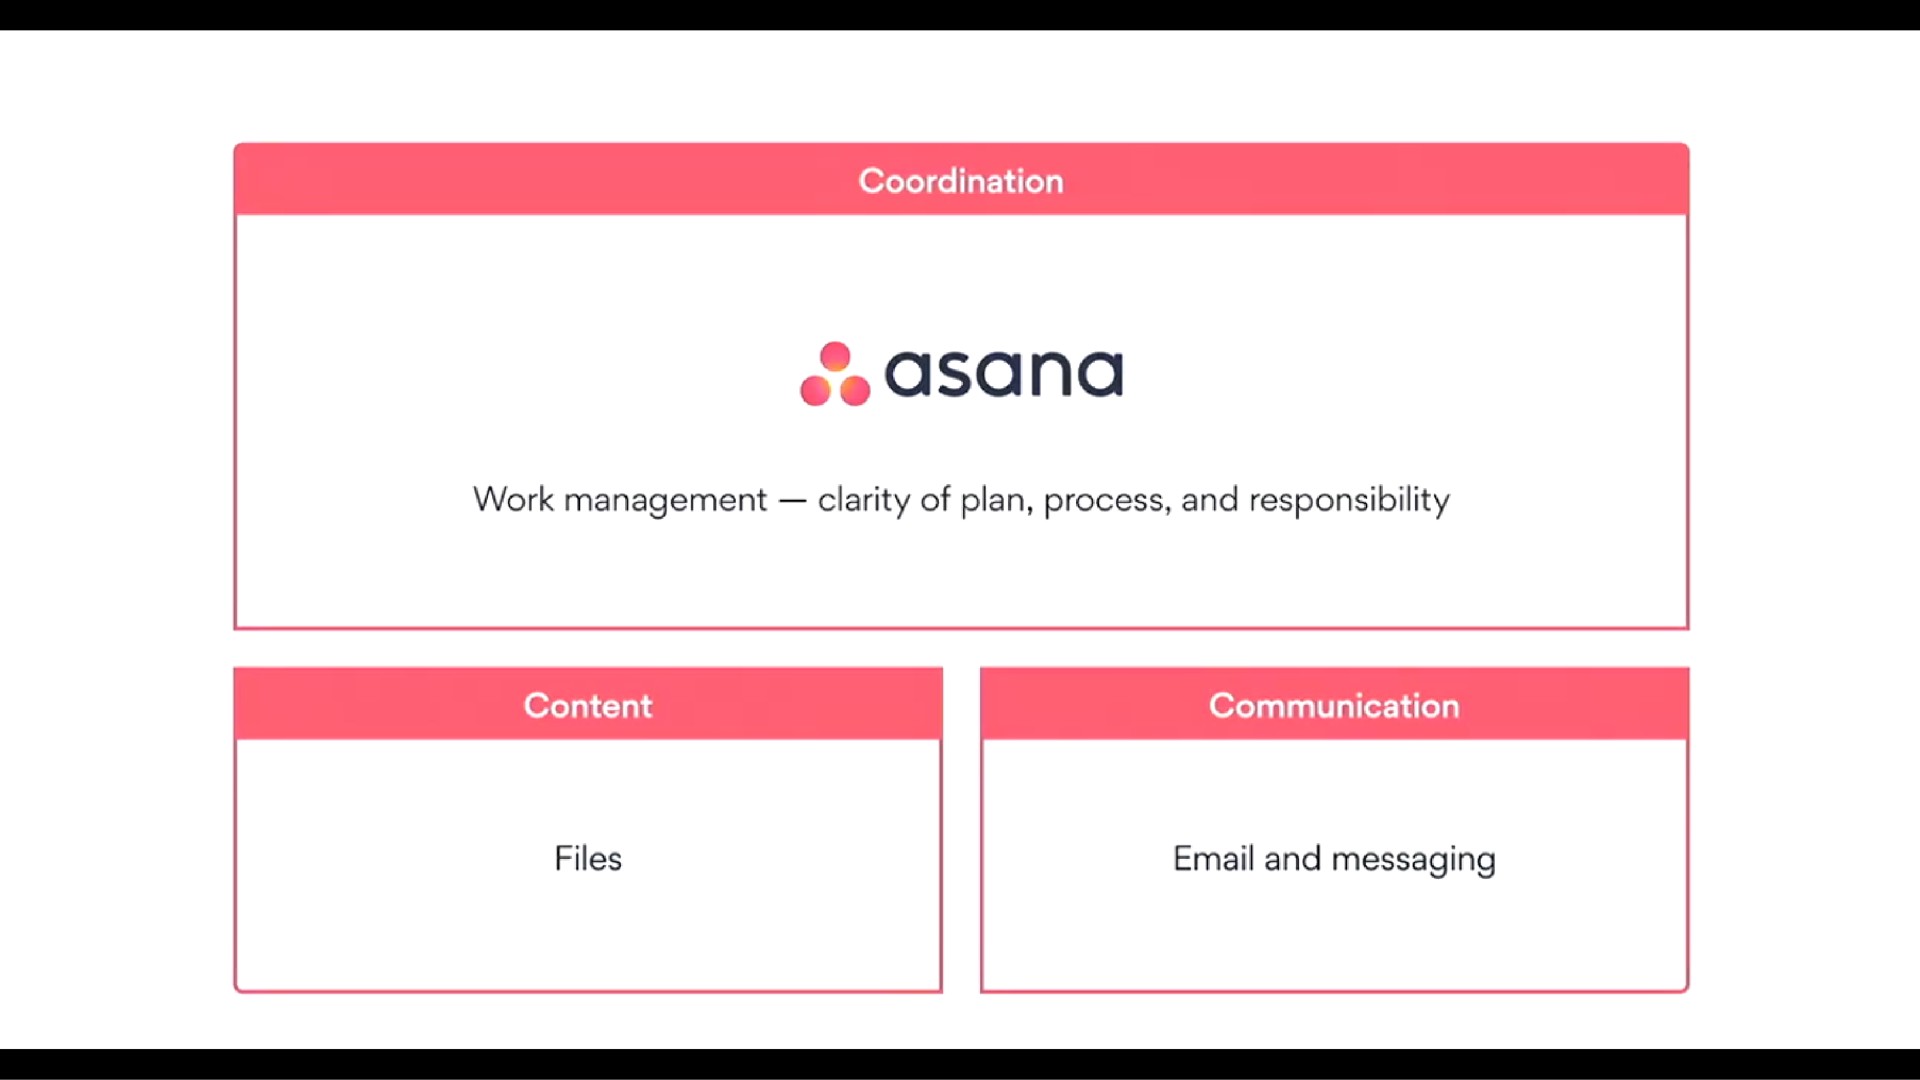 asana work management clarity of plan process and responsibility content and messaging communication | Asana